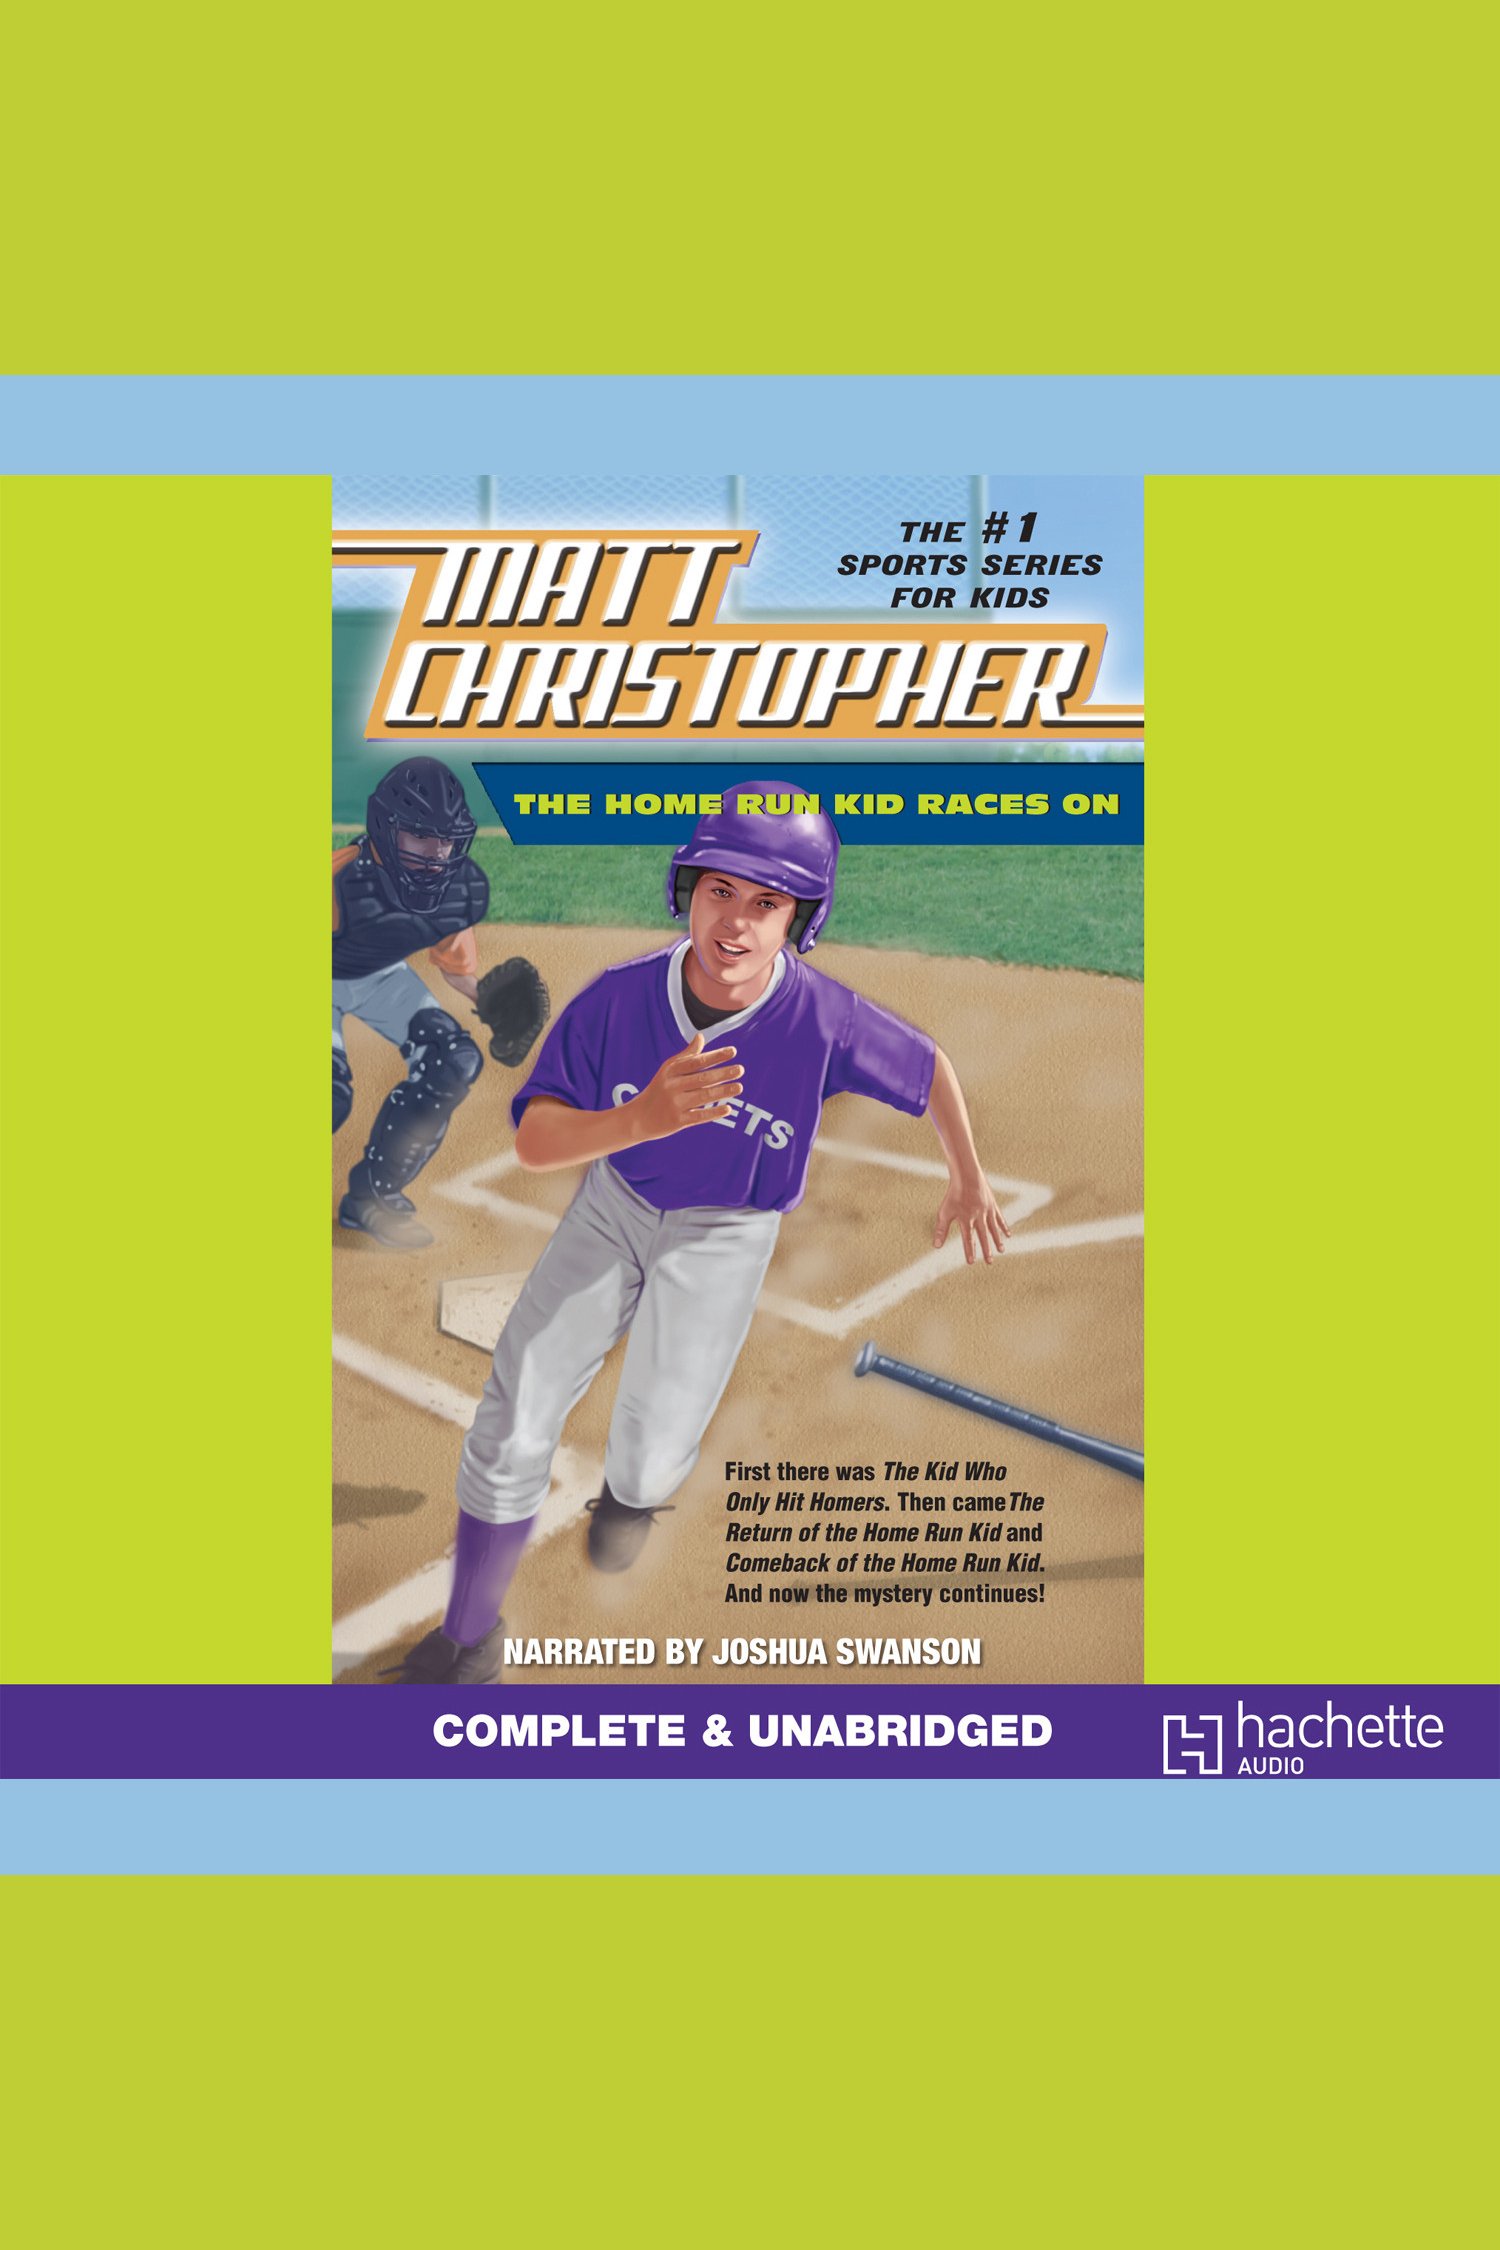 The home run kid races on cover image